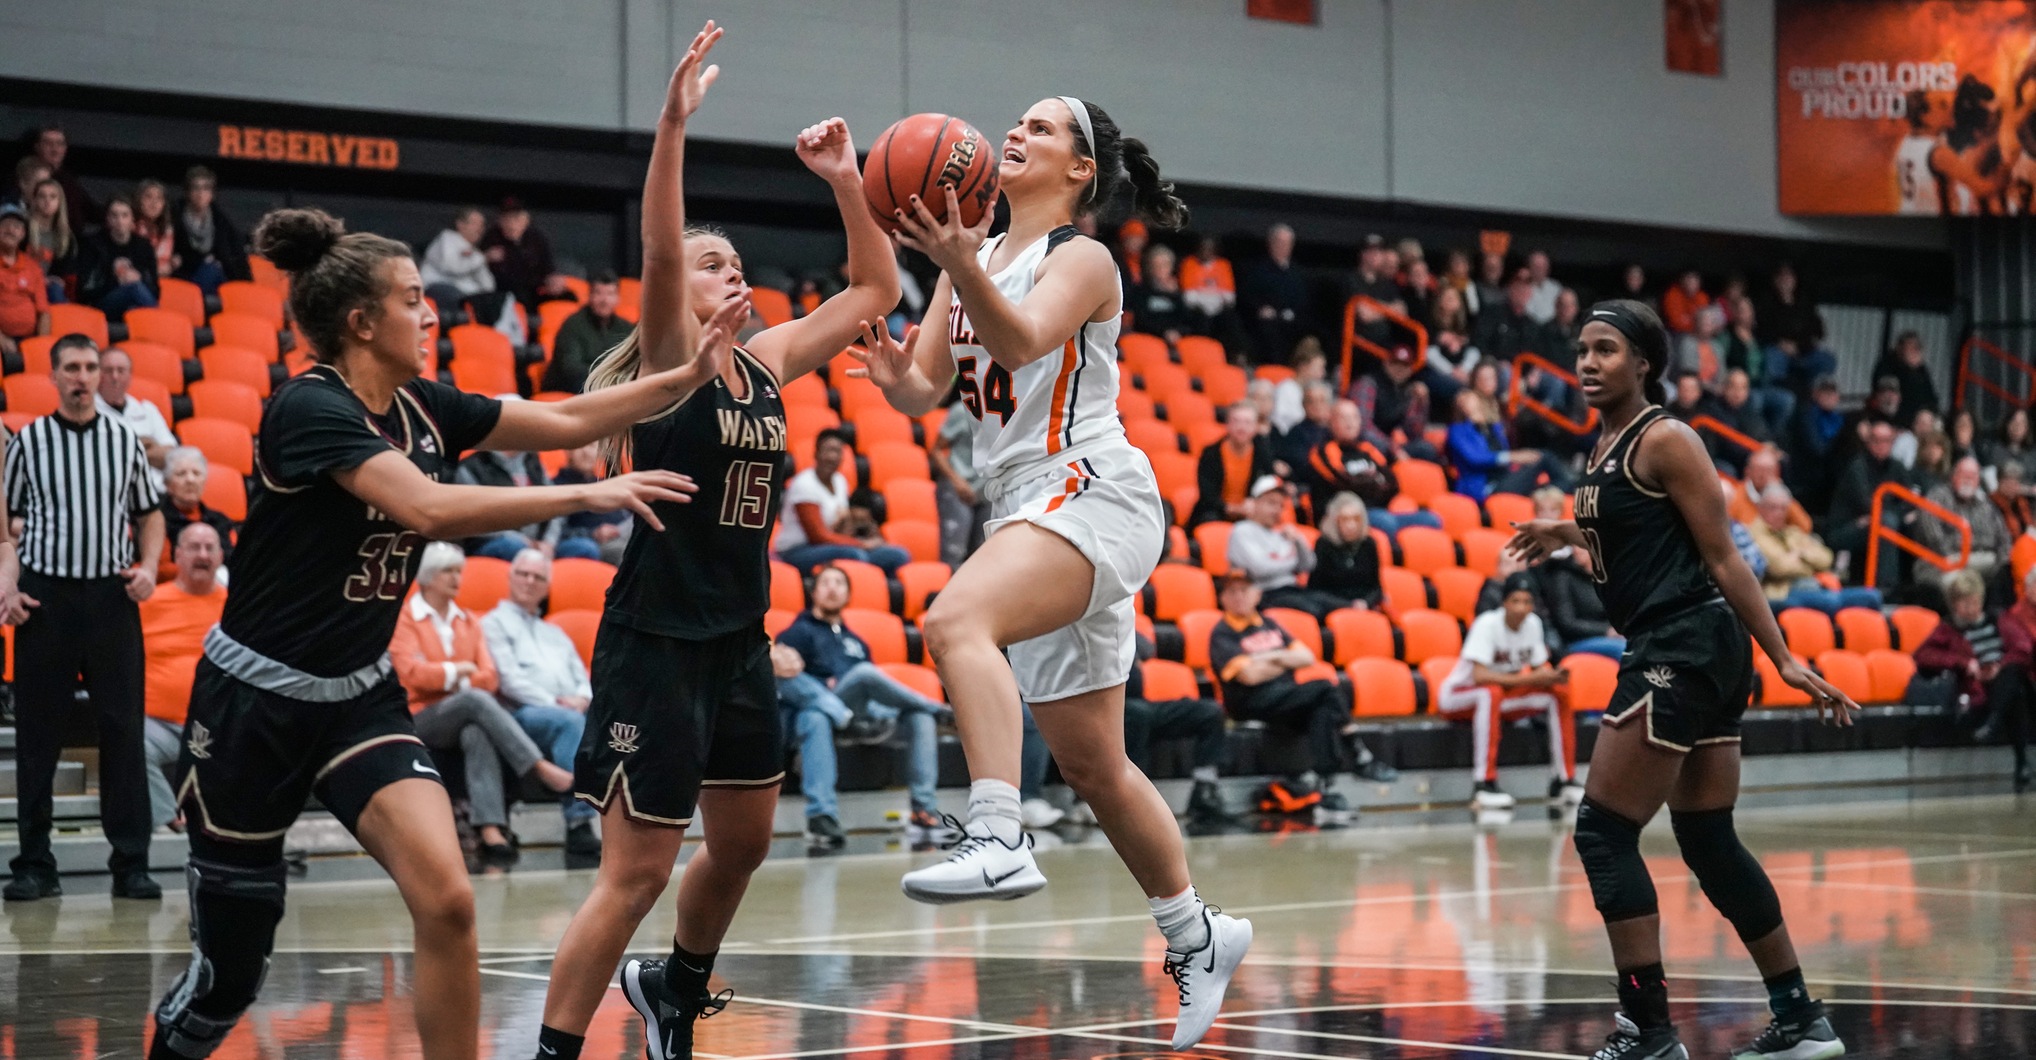 Oilers Fall to #14 Walsh in Croy